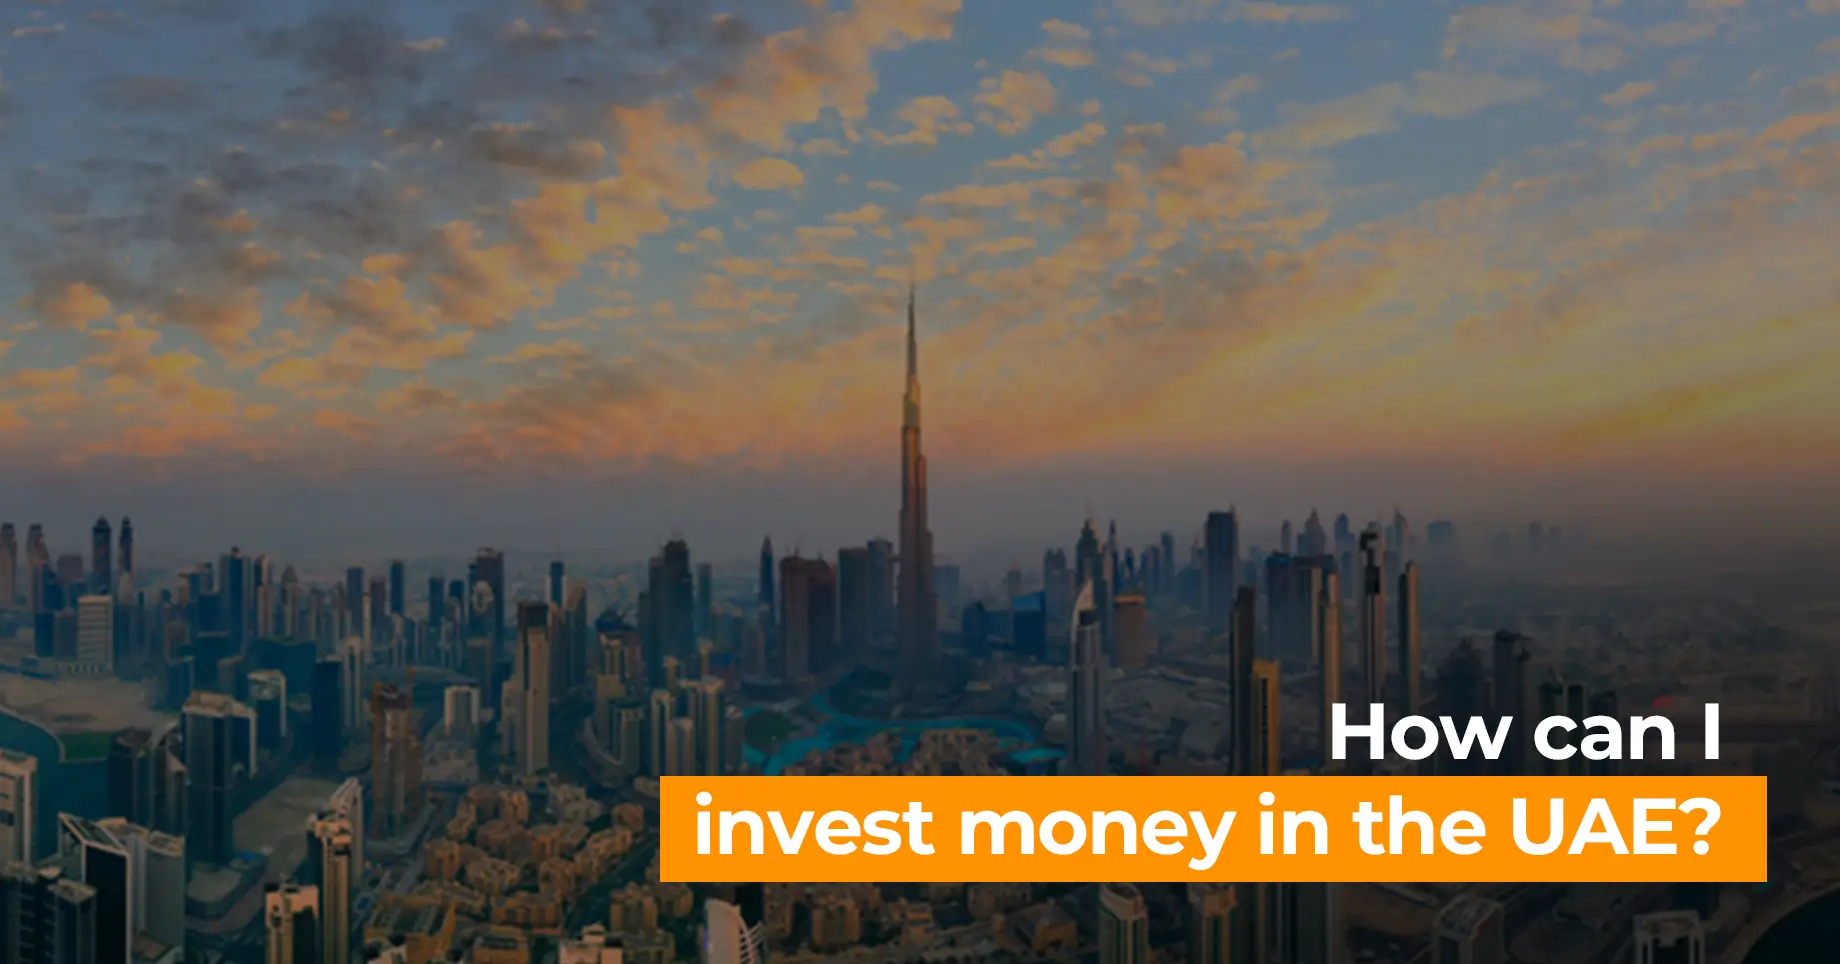 How can I invest money in the UAE?